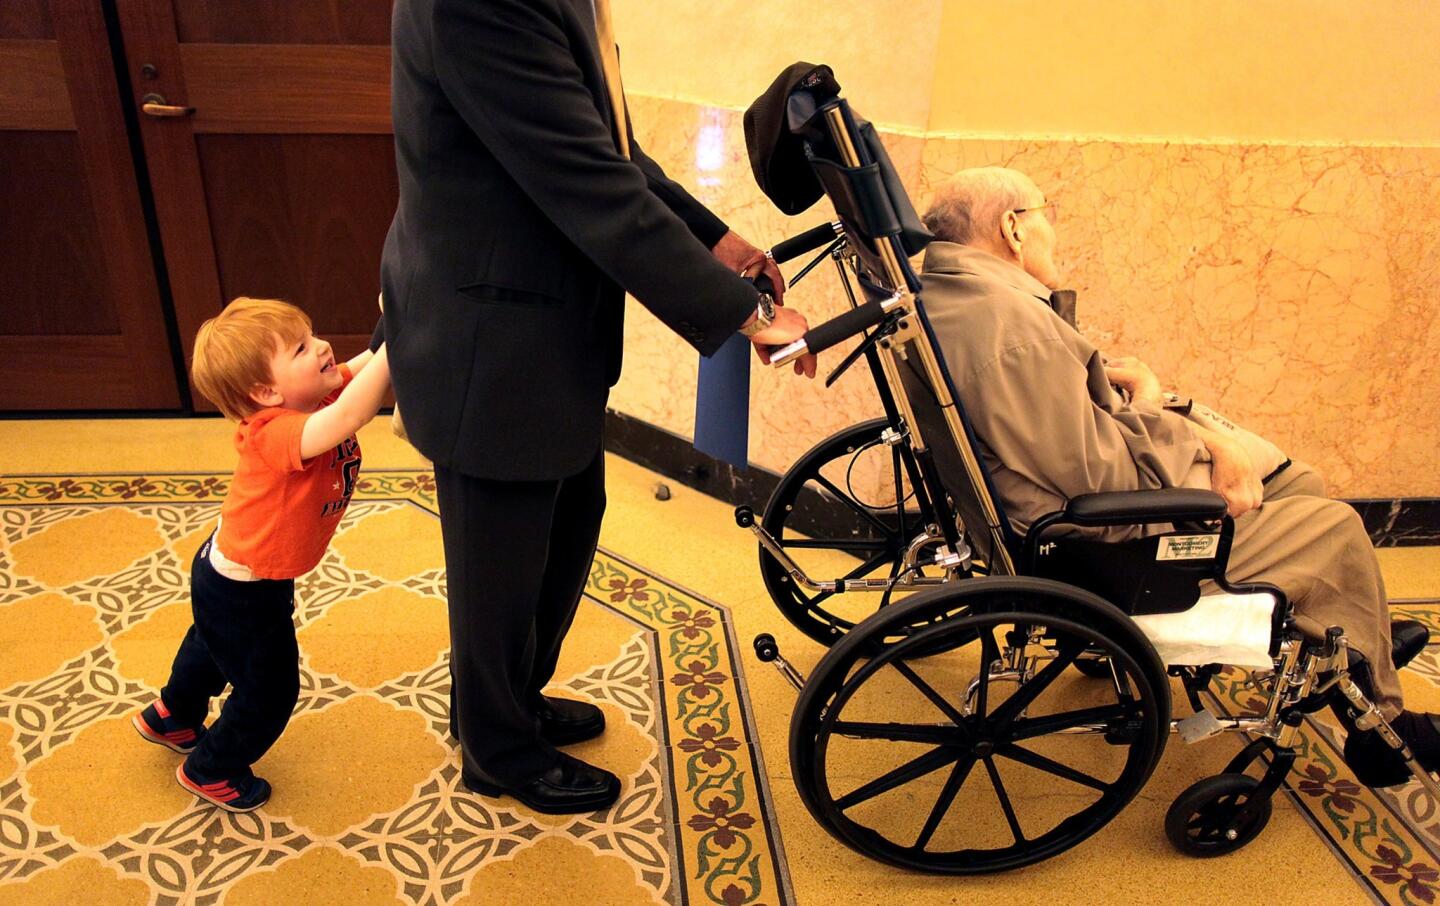 Brent Freedman, 3, pushes his grandfather, Gary Freedman, who is pushing his 100-year-old father, Walter Freedman, after Beverly Hills' tribute to residents who are at the century mark. The city itself turns 100 next week.